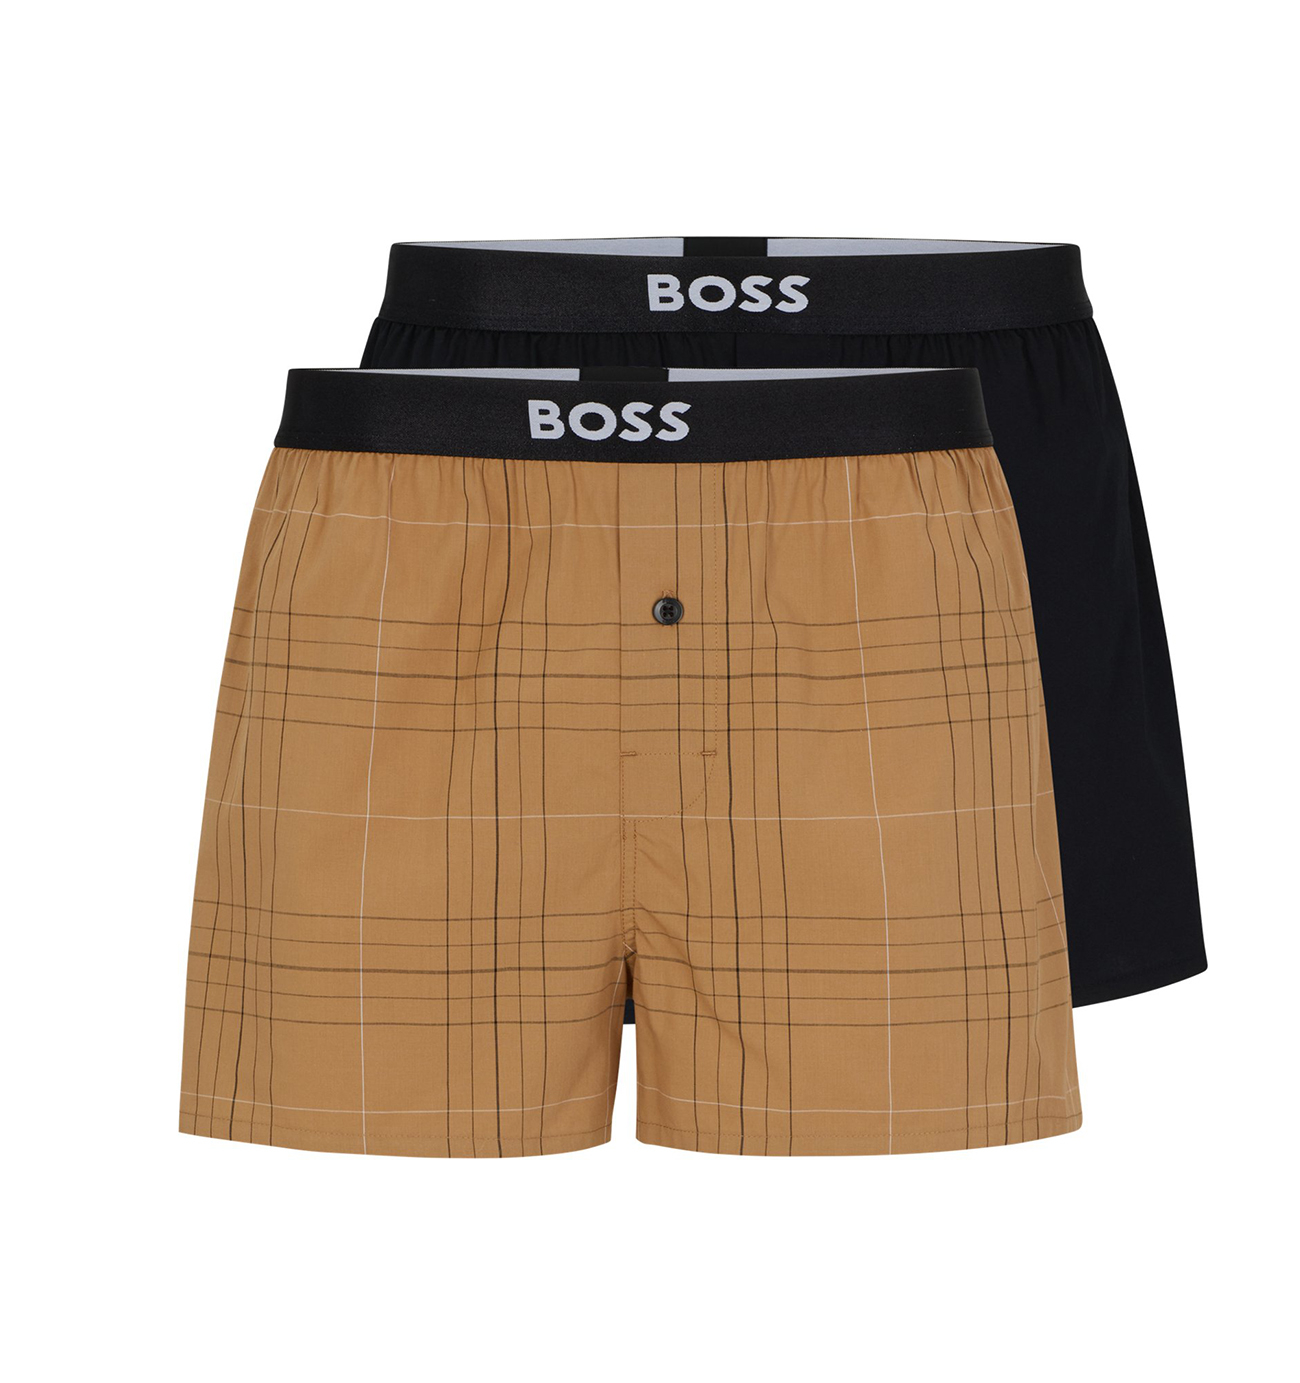 BOSS - trenky 2PACK natural pure cotton beige color stripes combo (HUGO BOSS)